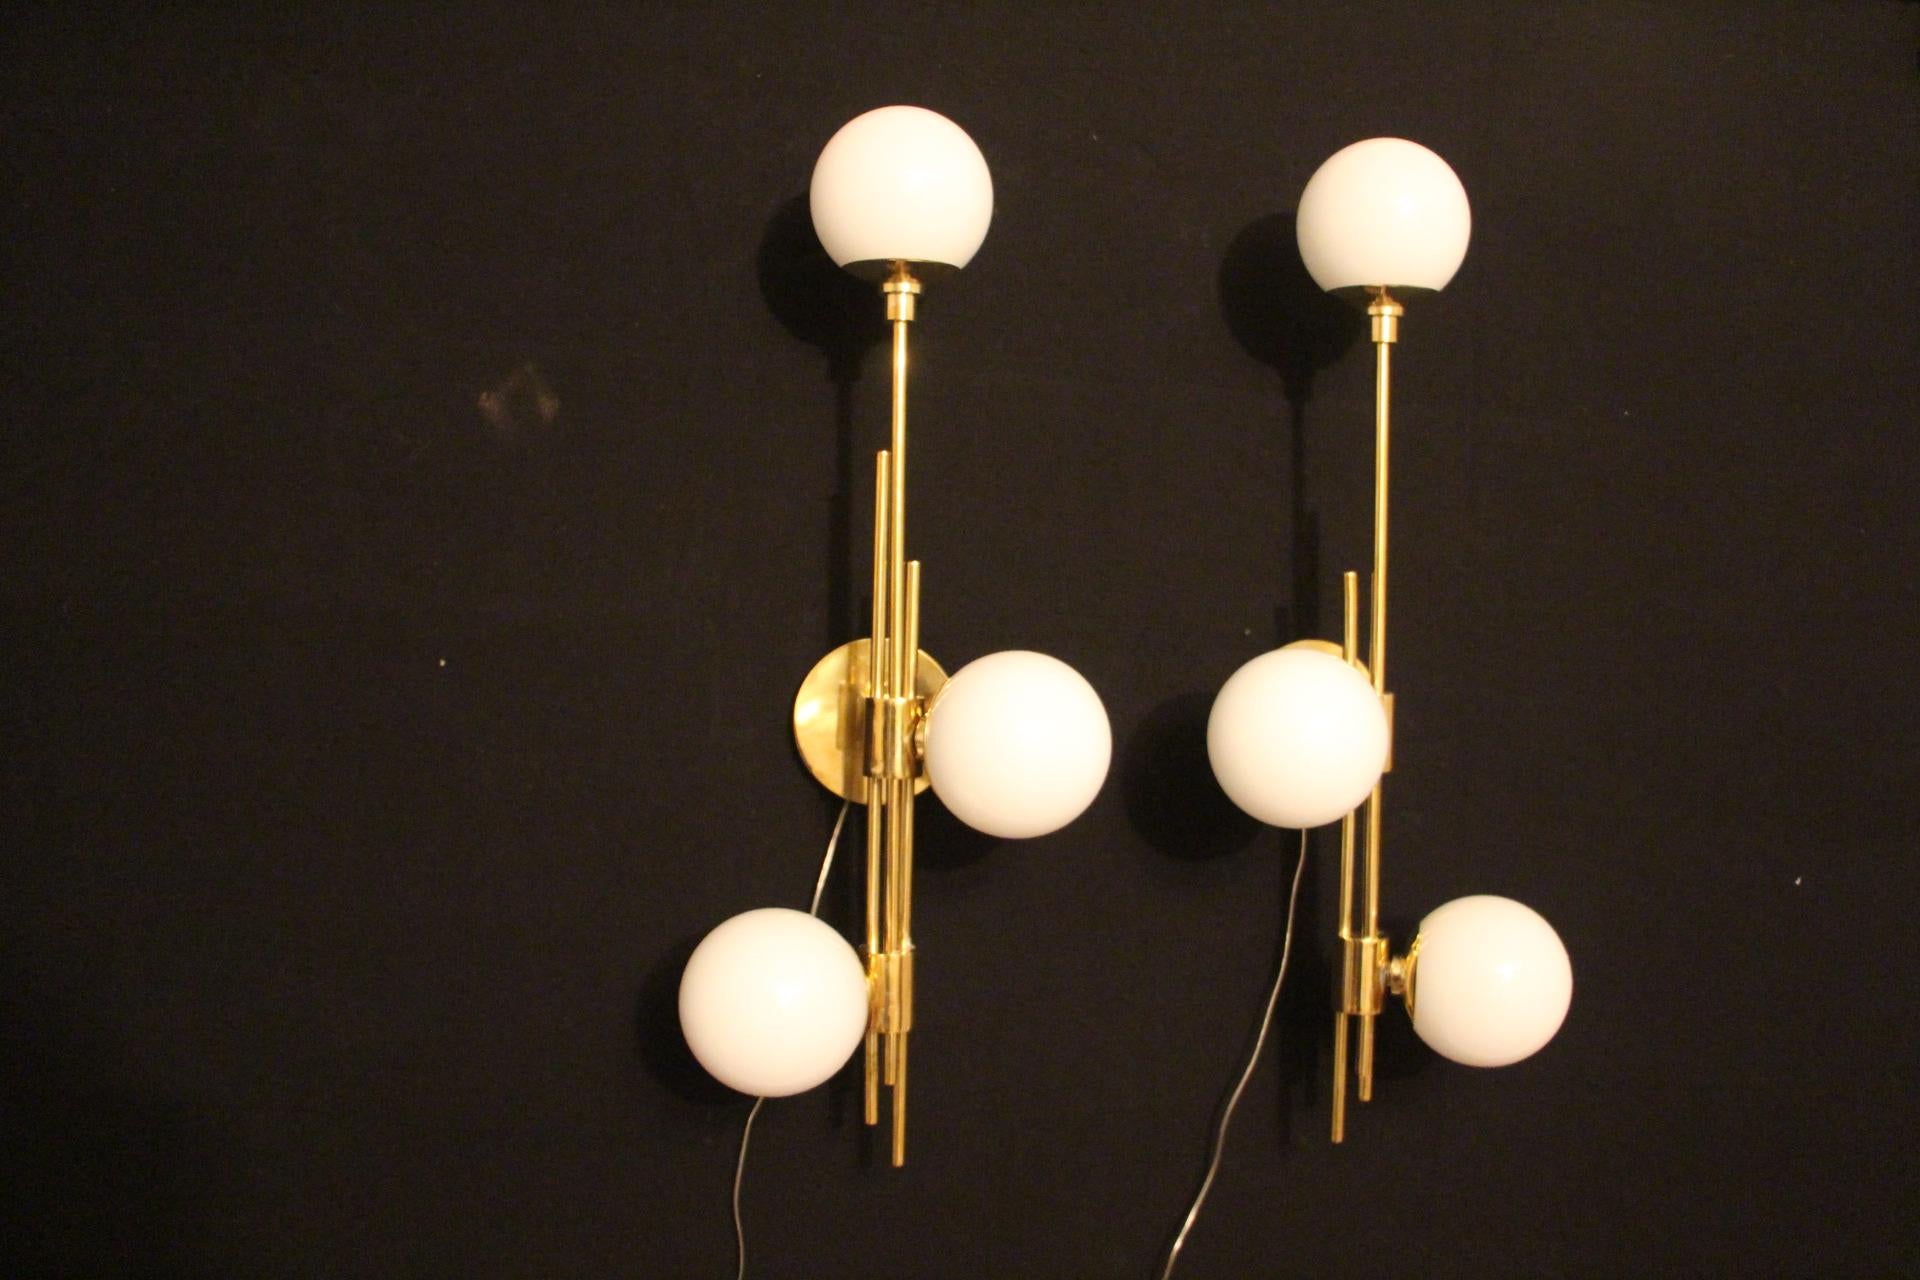 Italian Modern Pair of Brass and White Glass Sconces, Stilnovo Style Wall Lights